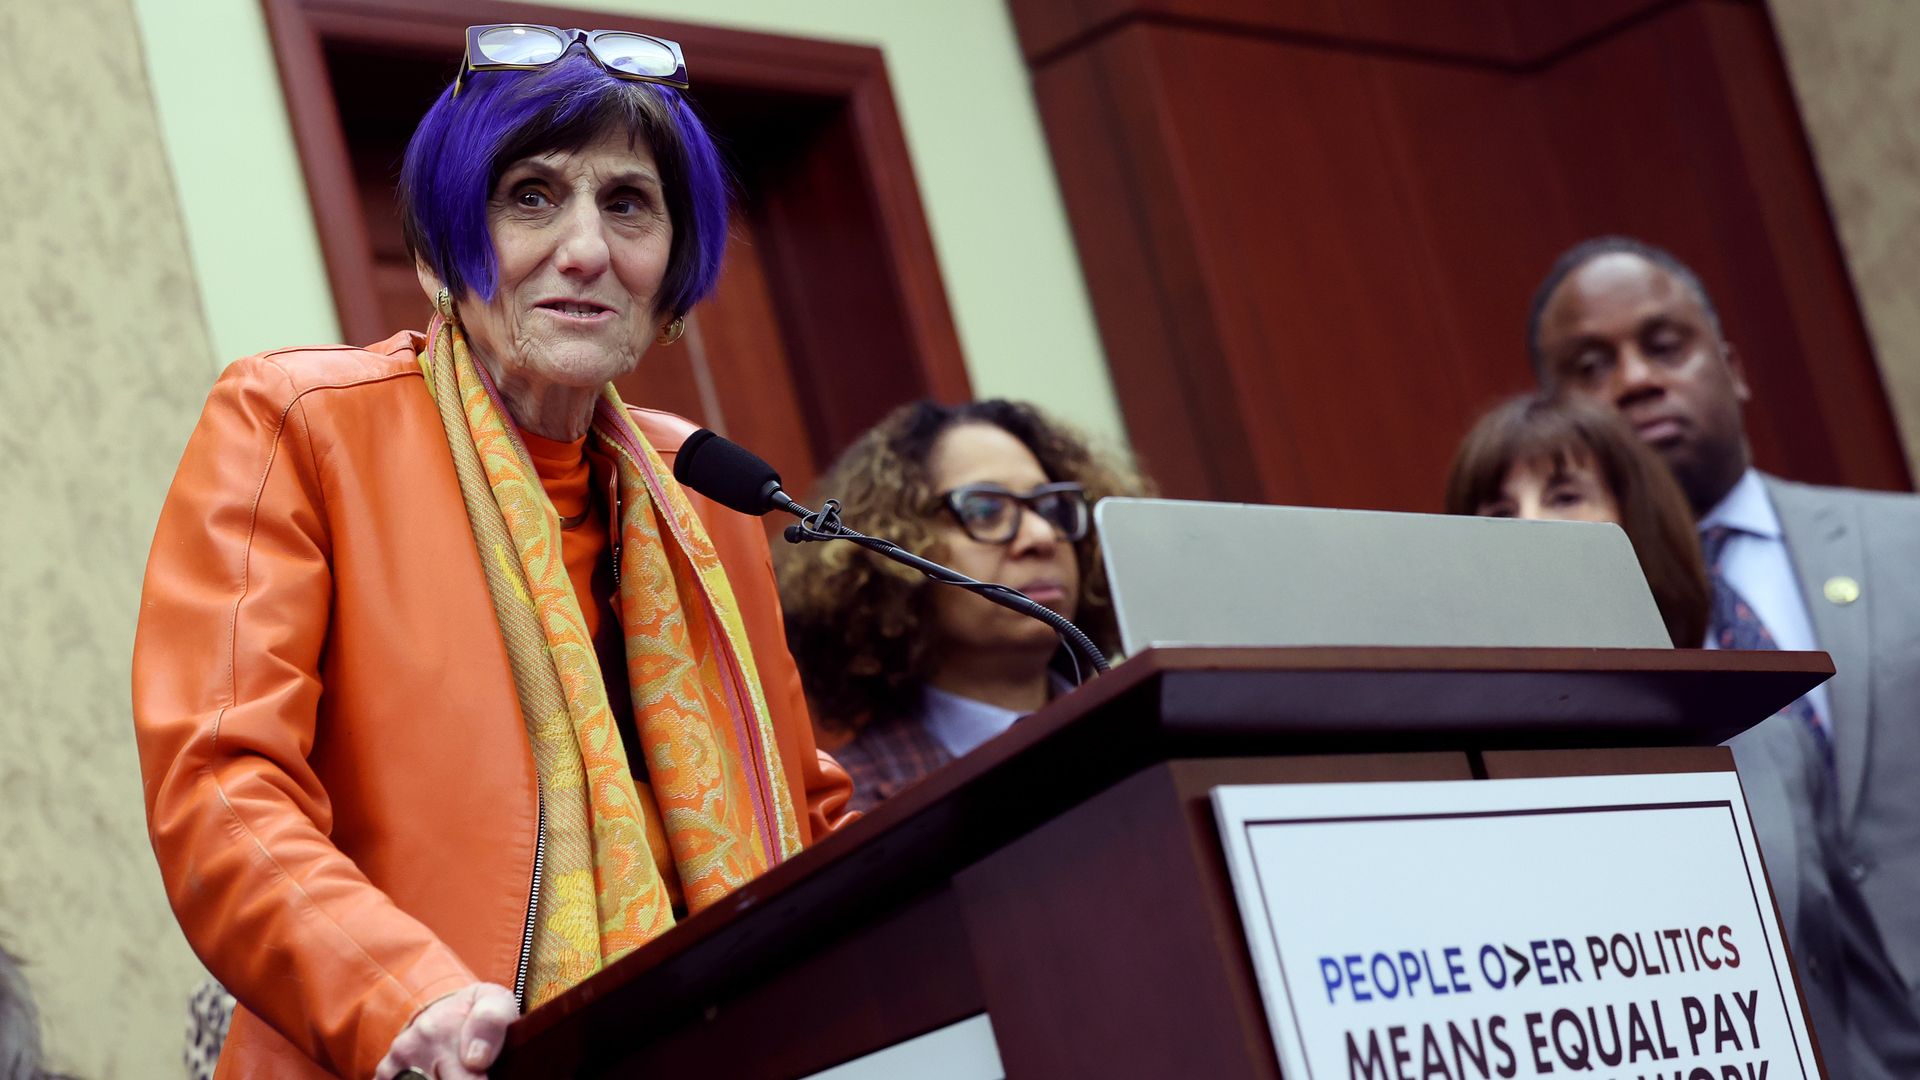 Rep. Rosa DeLauro wears an orange jacket as she stands behind a podium with a placard that says people over politics means equal pay.